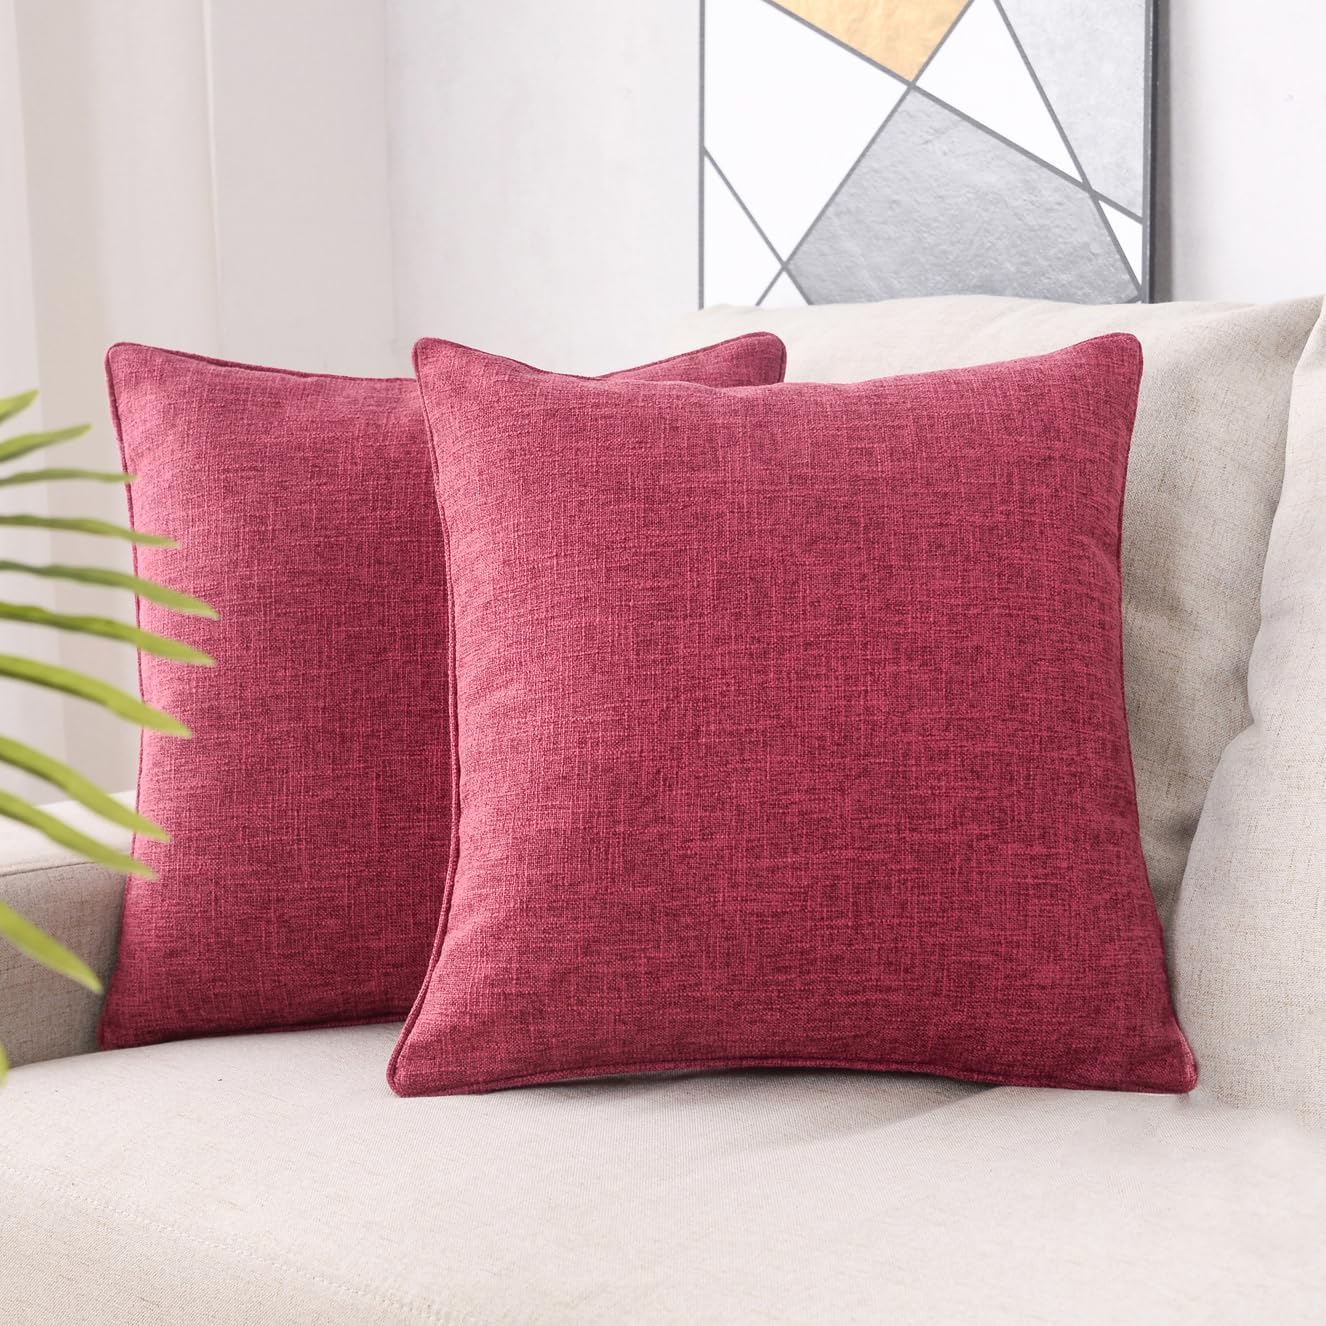 HPUK Linen Throw Pillow Covers Pack of 2, 18x18 Inch Accent Cushion Covers for Living Room, Bedroom, Decorative Solid Color Pillow Covers for Couch, Sofa, Chair, Fuchsia Rose